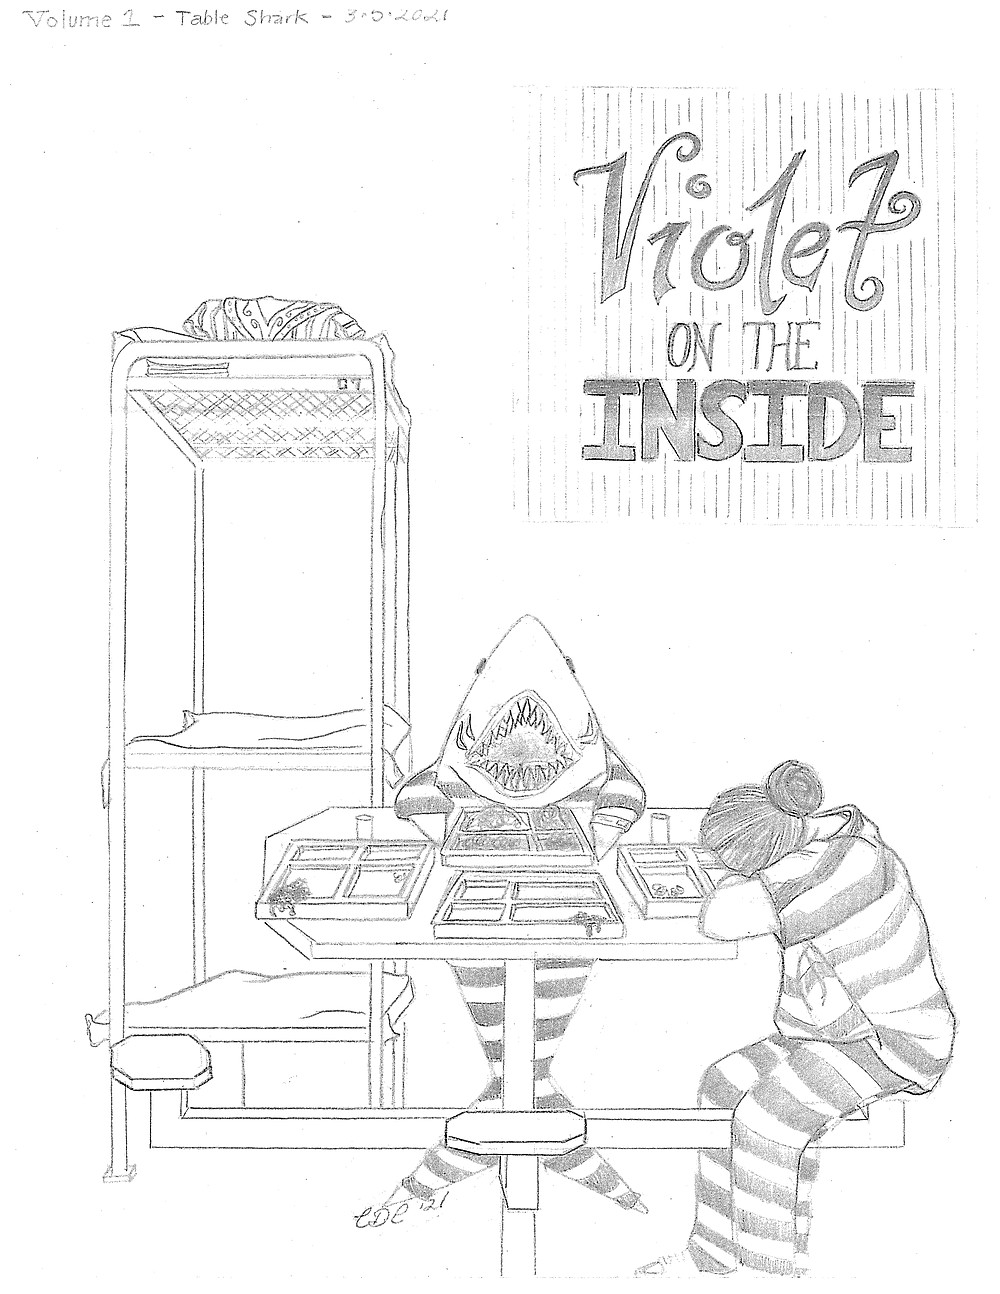 Celina Coleman is working on a series of drawings that depict her life while incarcerated for a collection she’s calling “Violet on the Inside.” This drawing is called “Table Shark.” “Oftentimes in these jail settings, there are a few individuals that ‘shark out’ others’ trays to satisfy their un-ending hunger inflicted by boredom,” she says of this drawing. Coleman says that people new to incarceration are often anxious and can’t eat, while those who have been in the setting for a while are always on the hunt for extra food.